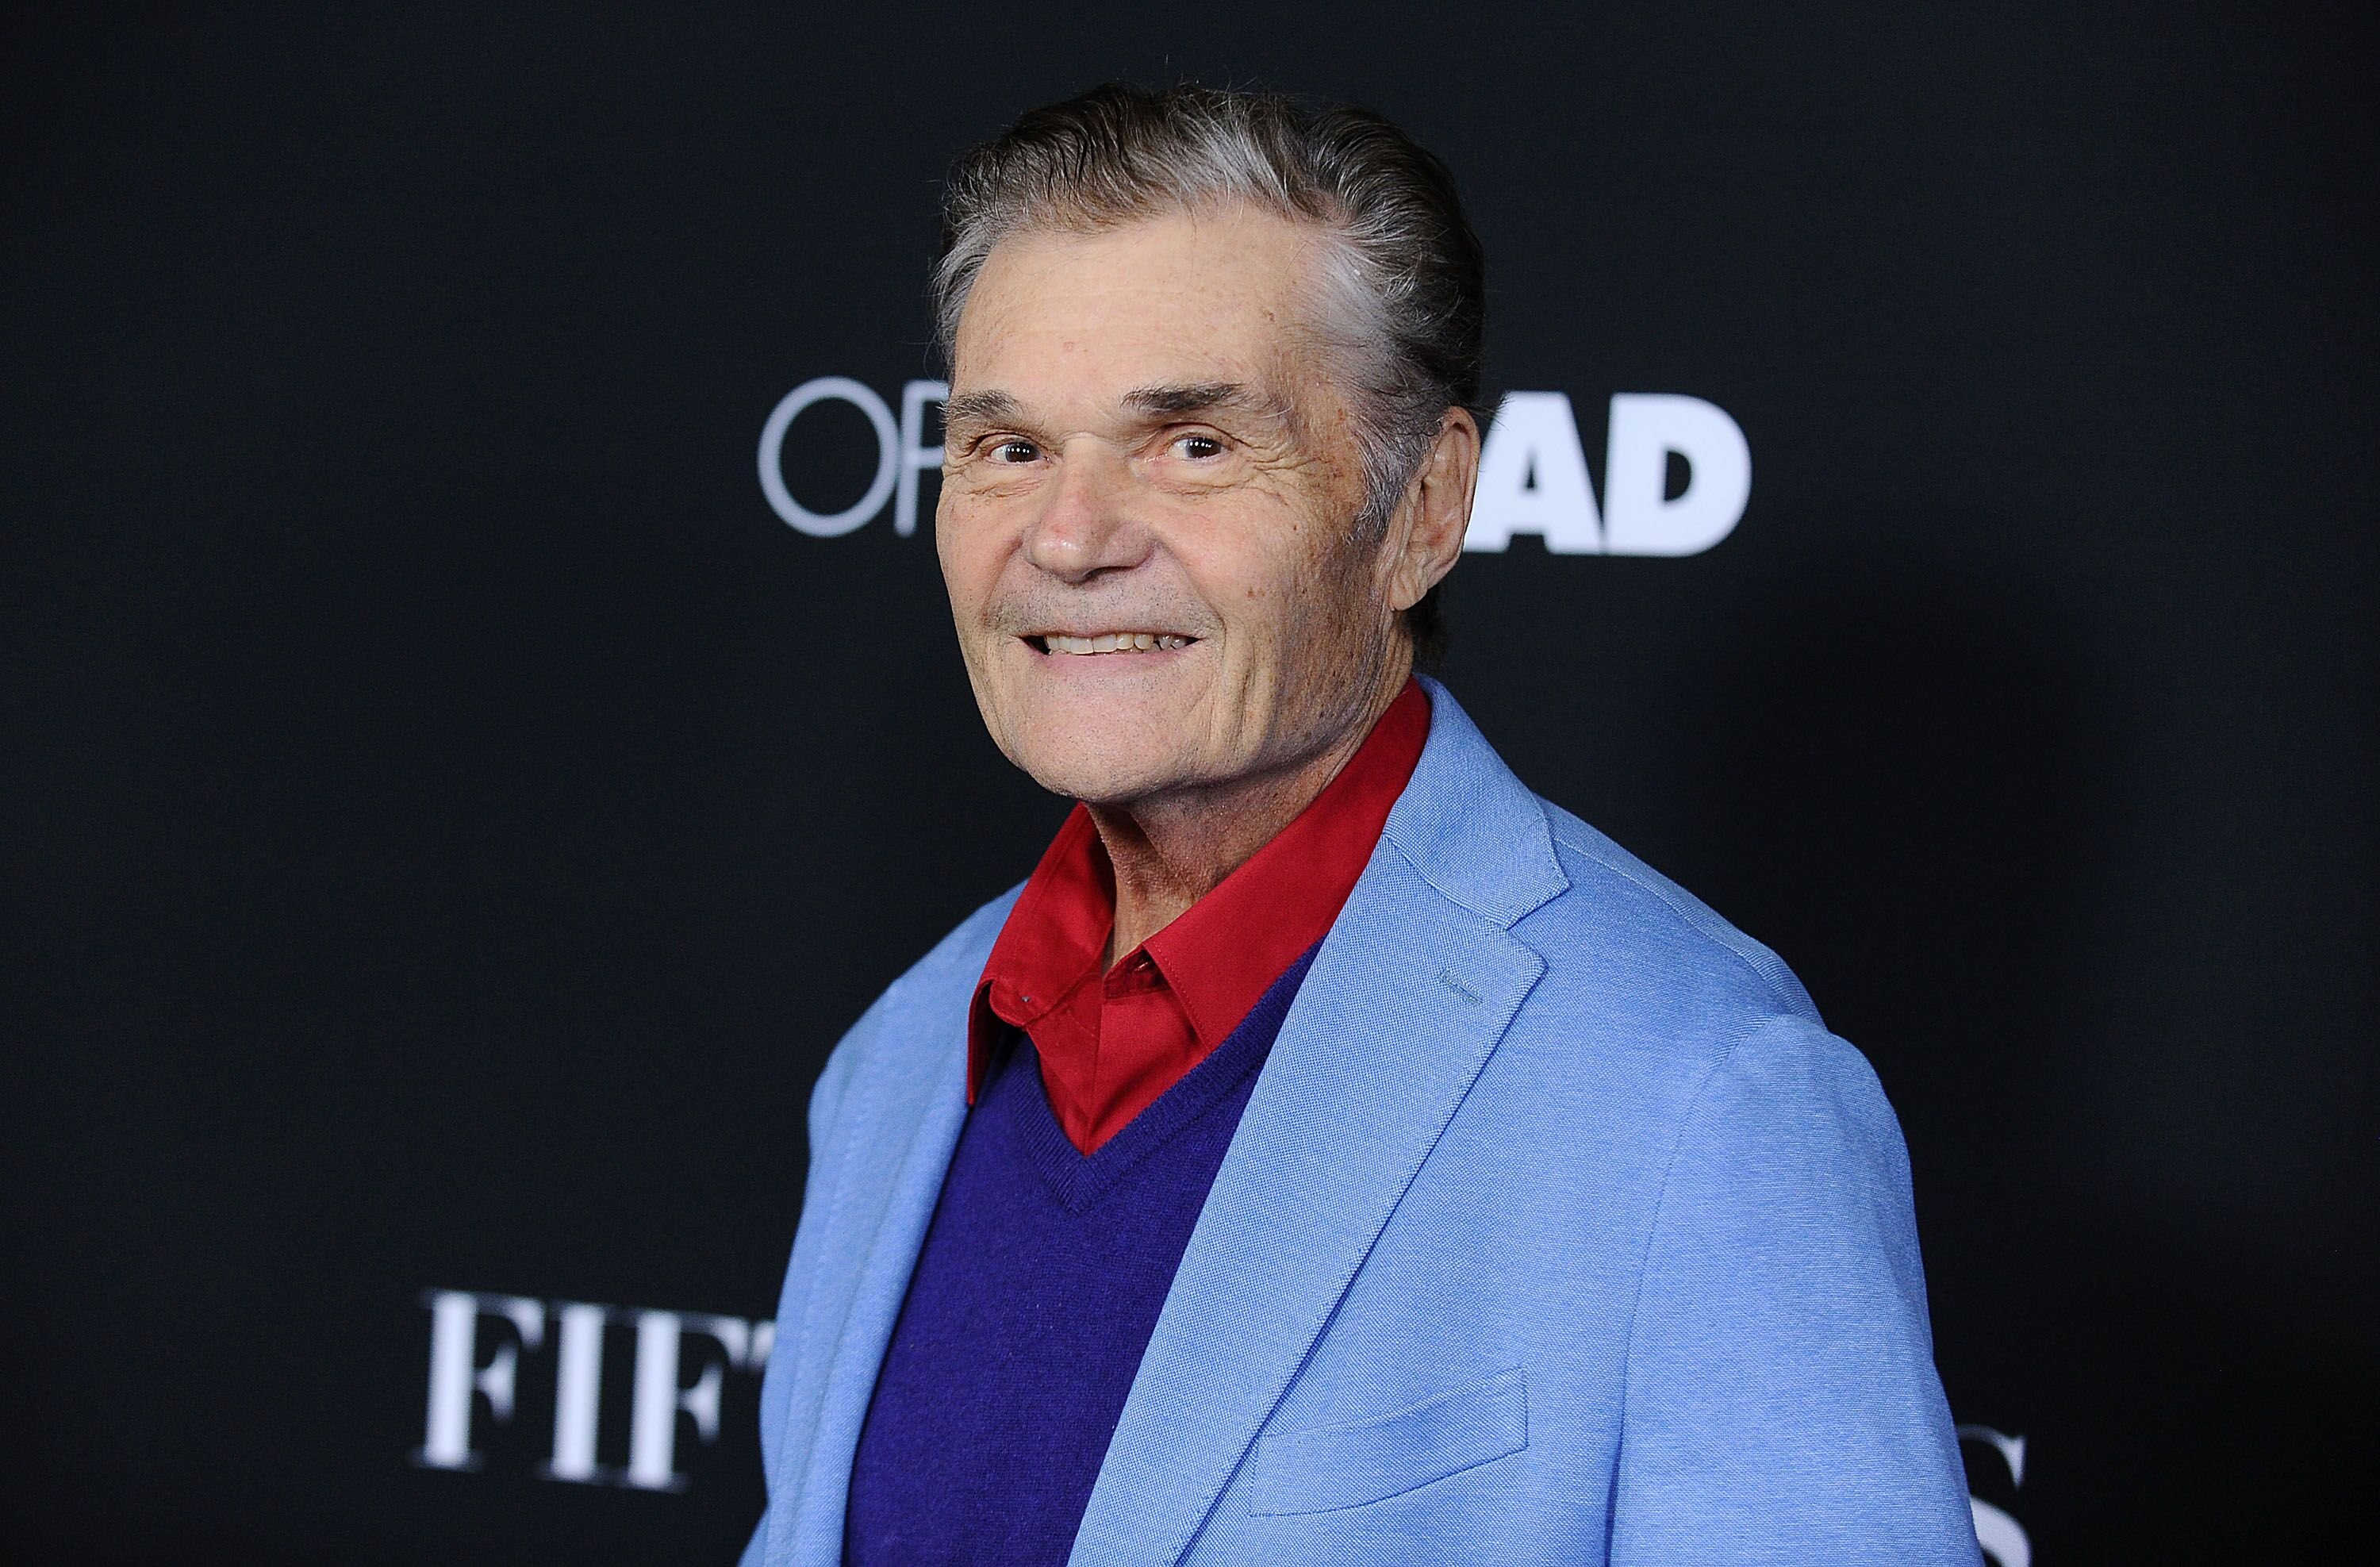 Fred Willard at the premiere of "Fifty Shades of Black" at Regal Cinemas L.A. Live in Los Angeles, California | Photo: Jason LaVeris/FilmMagic